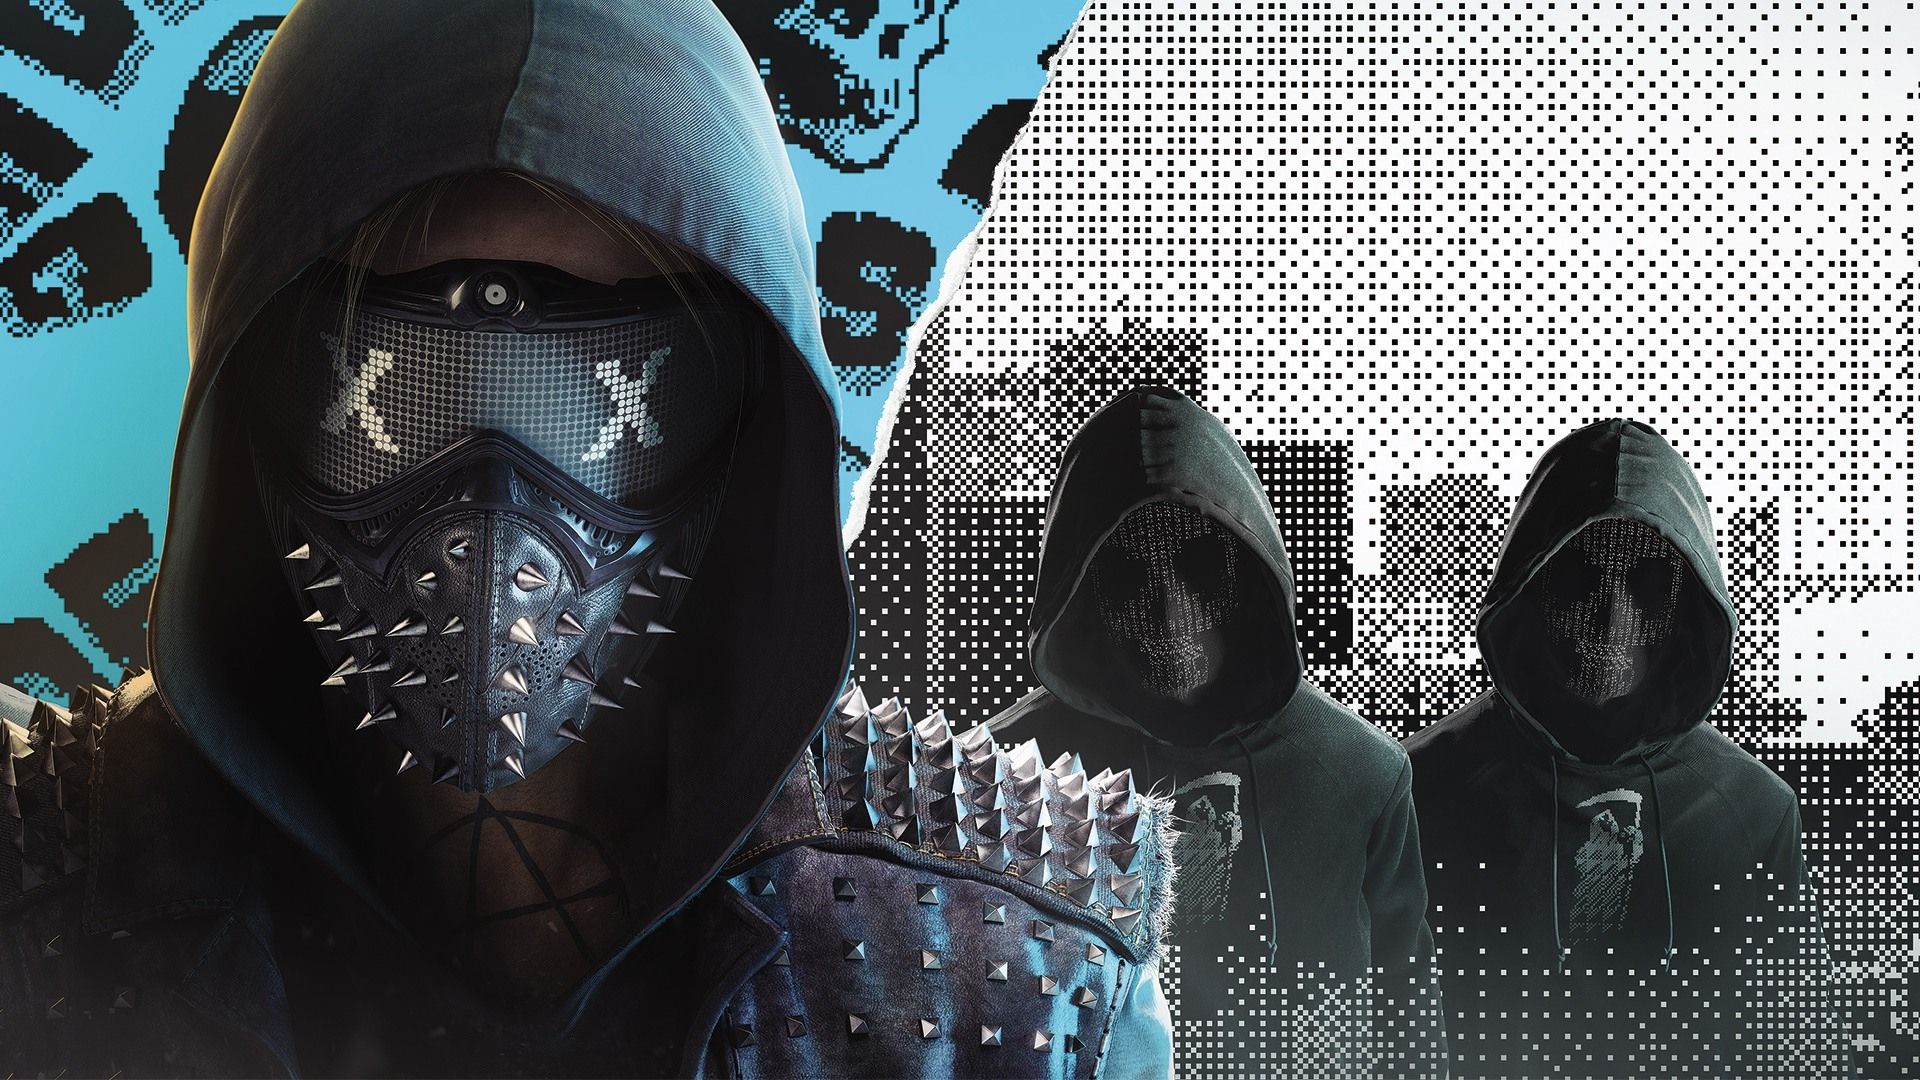 watch dogs 2 wrench wallpaper,personal protective equipment,headgear,photography,balaclava